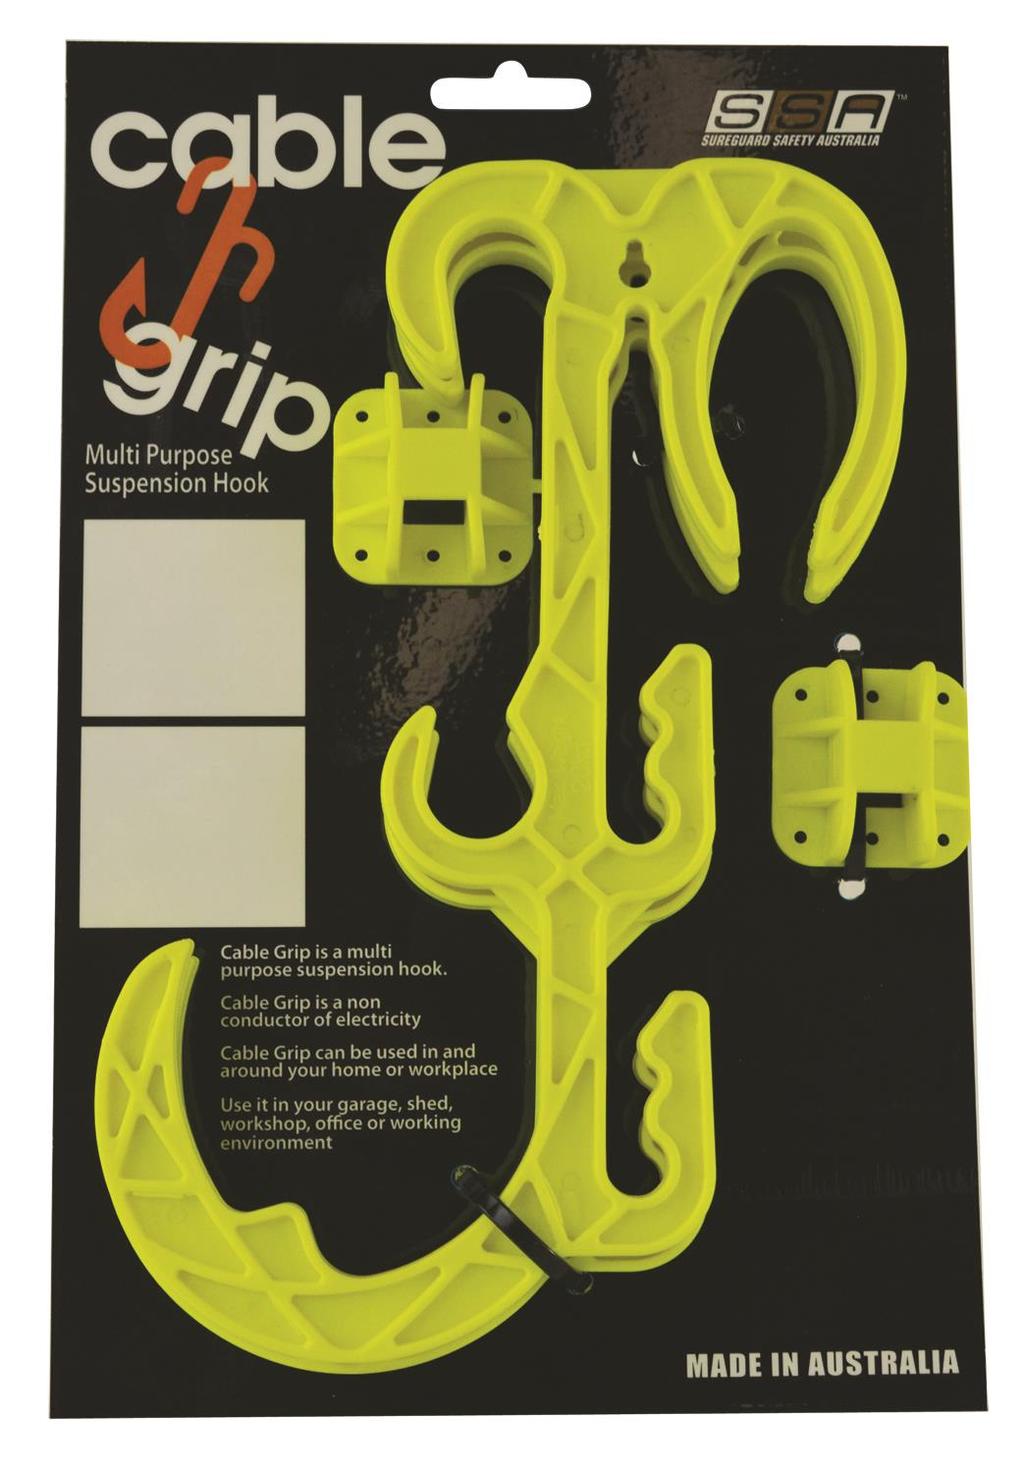 Detachable support bracket included to install Cable Grip to timber, plaster board, metal or concrete with correct anchors Cable Grip suspension hangers are used for suspending electrical leads and